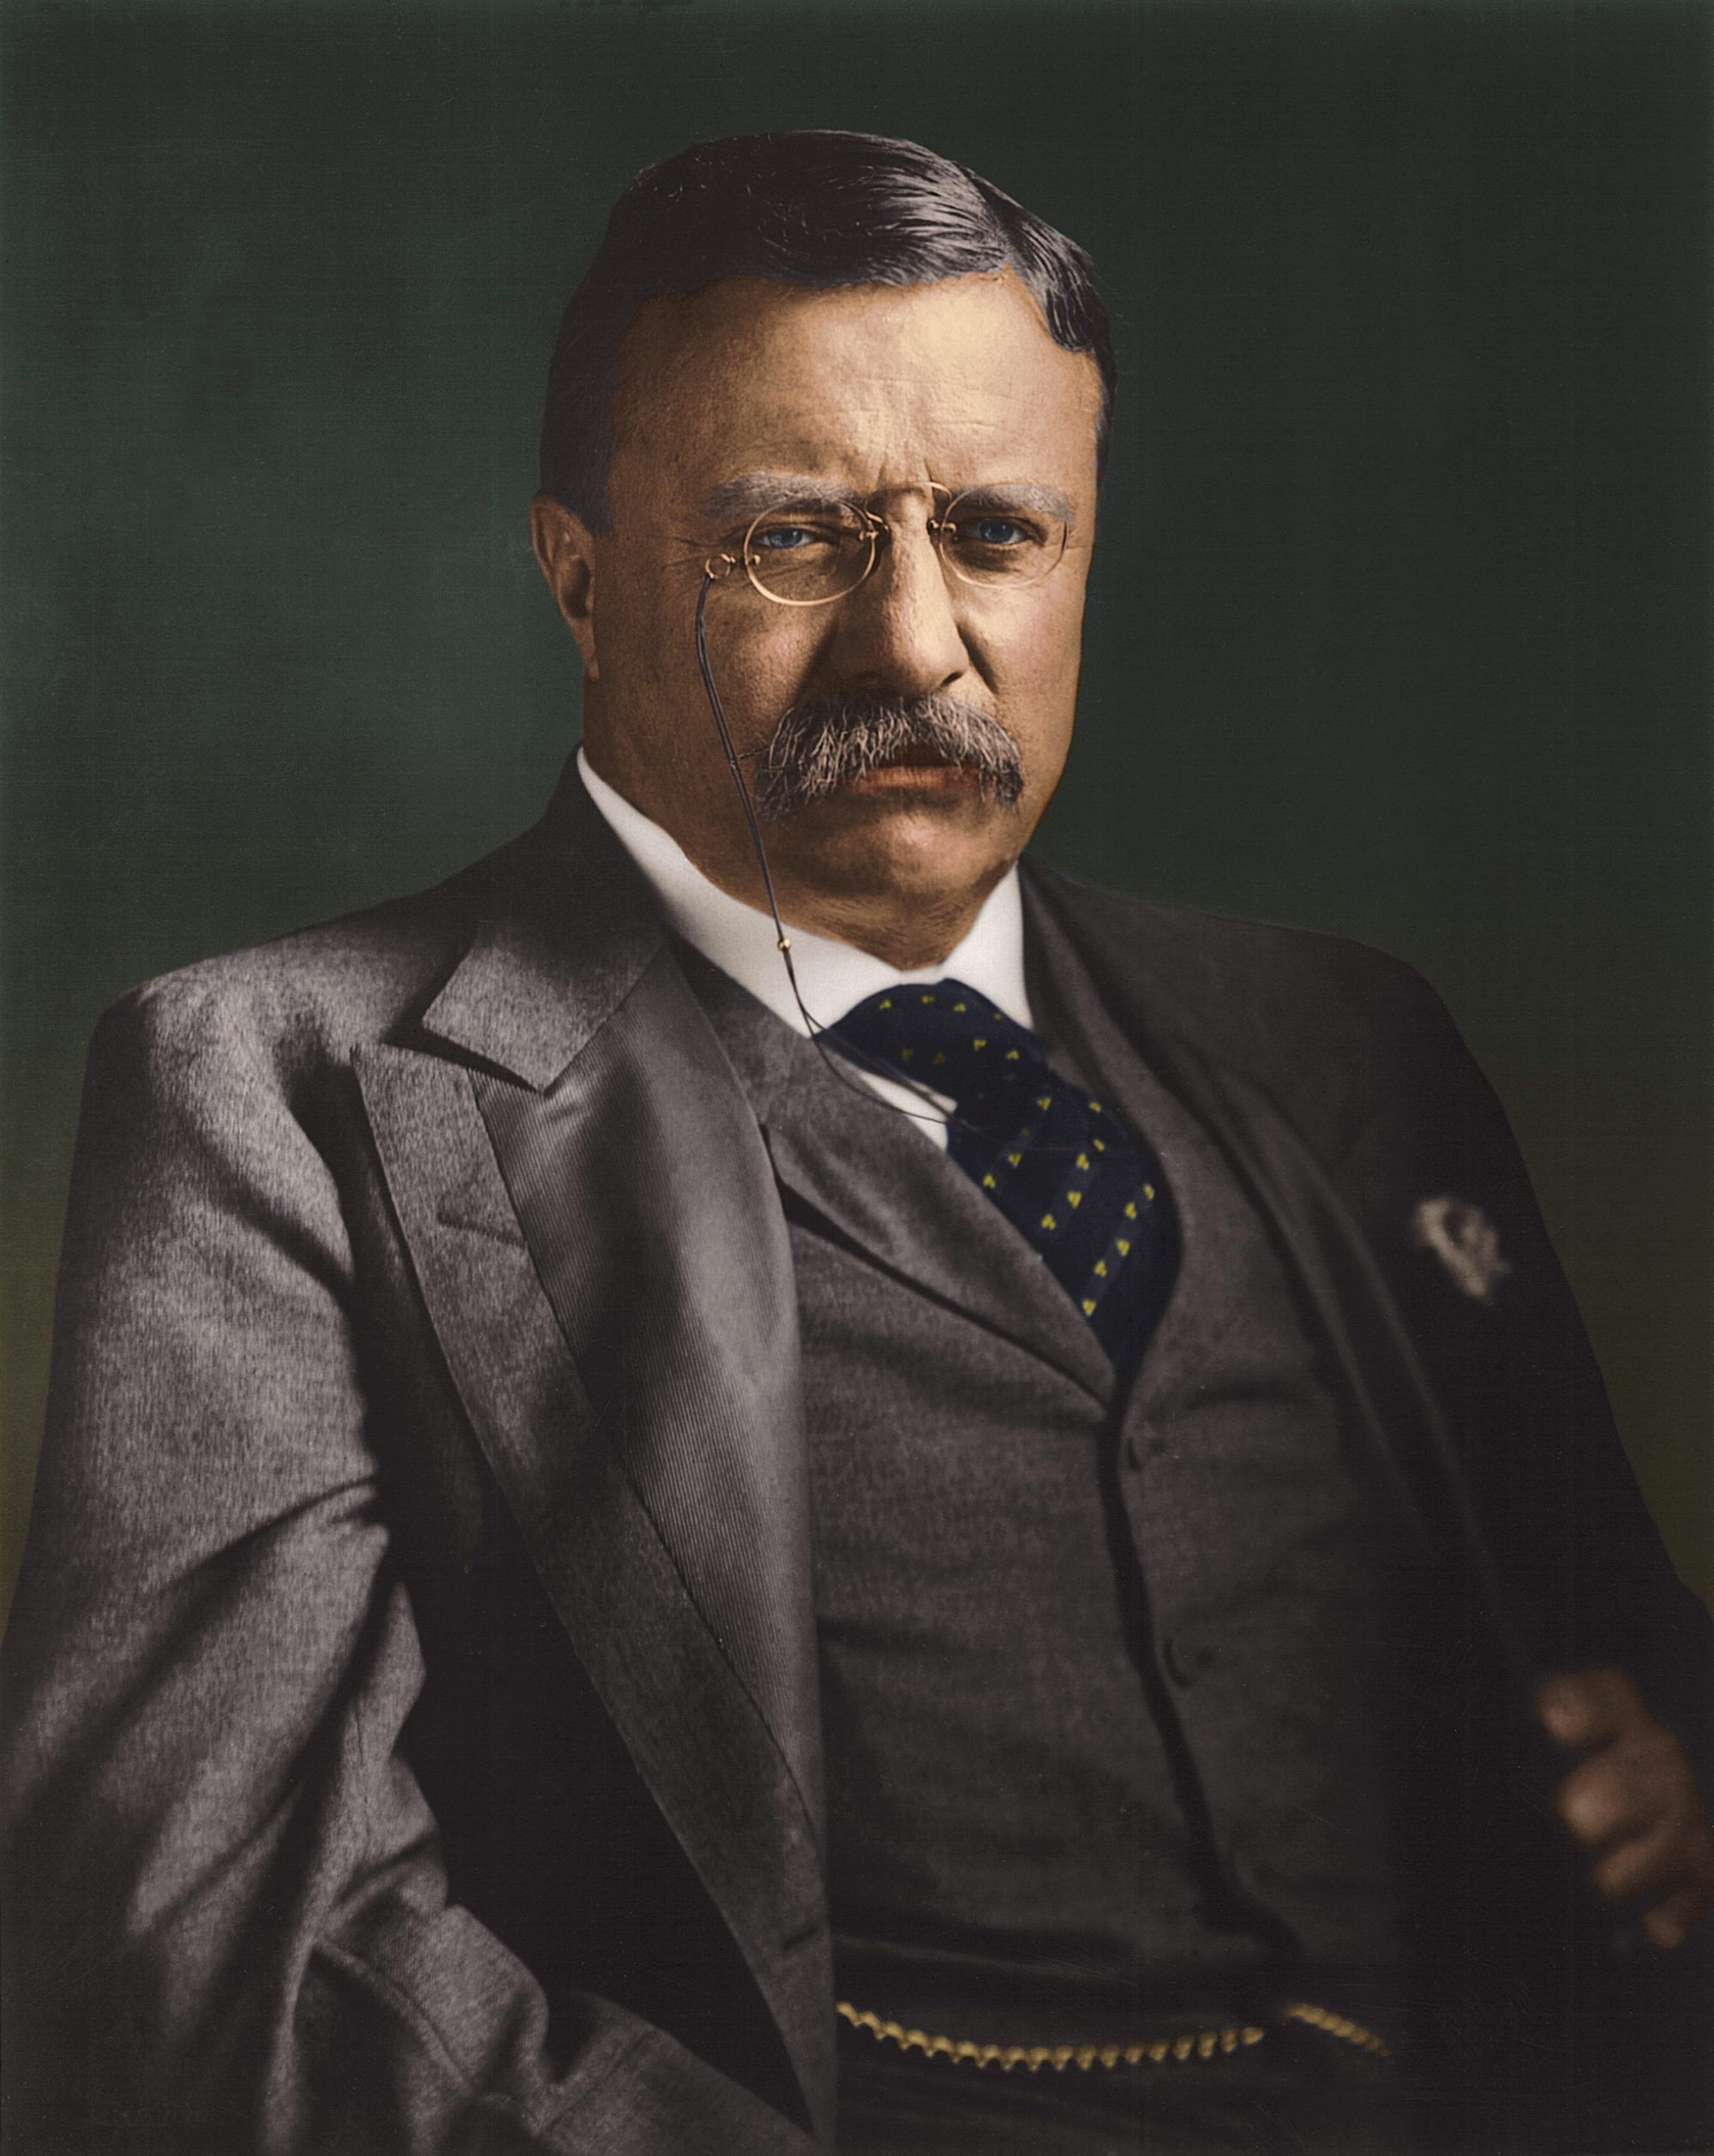 Theodore Roosevelt (1858 - 1919), twenty-sixth president of the United States of America. Photo by Stock Montage/Stock Montage/Getty Images